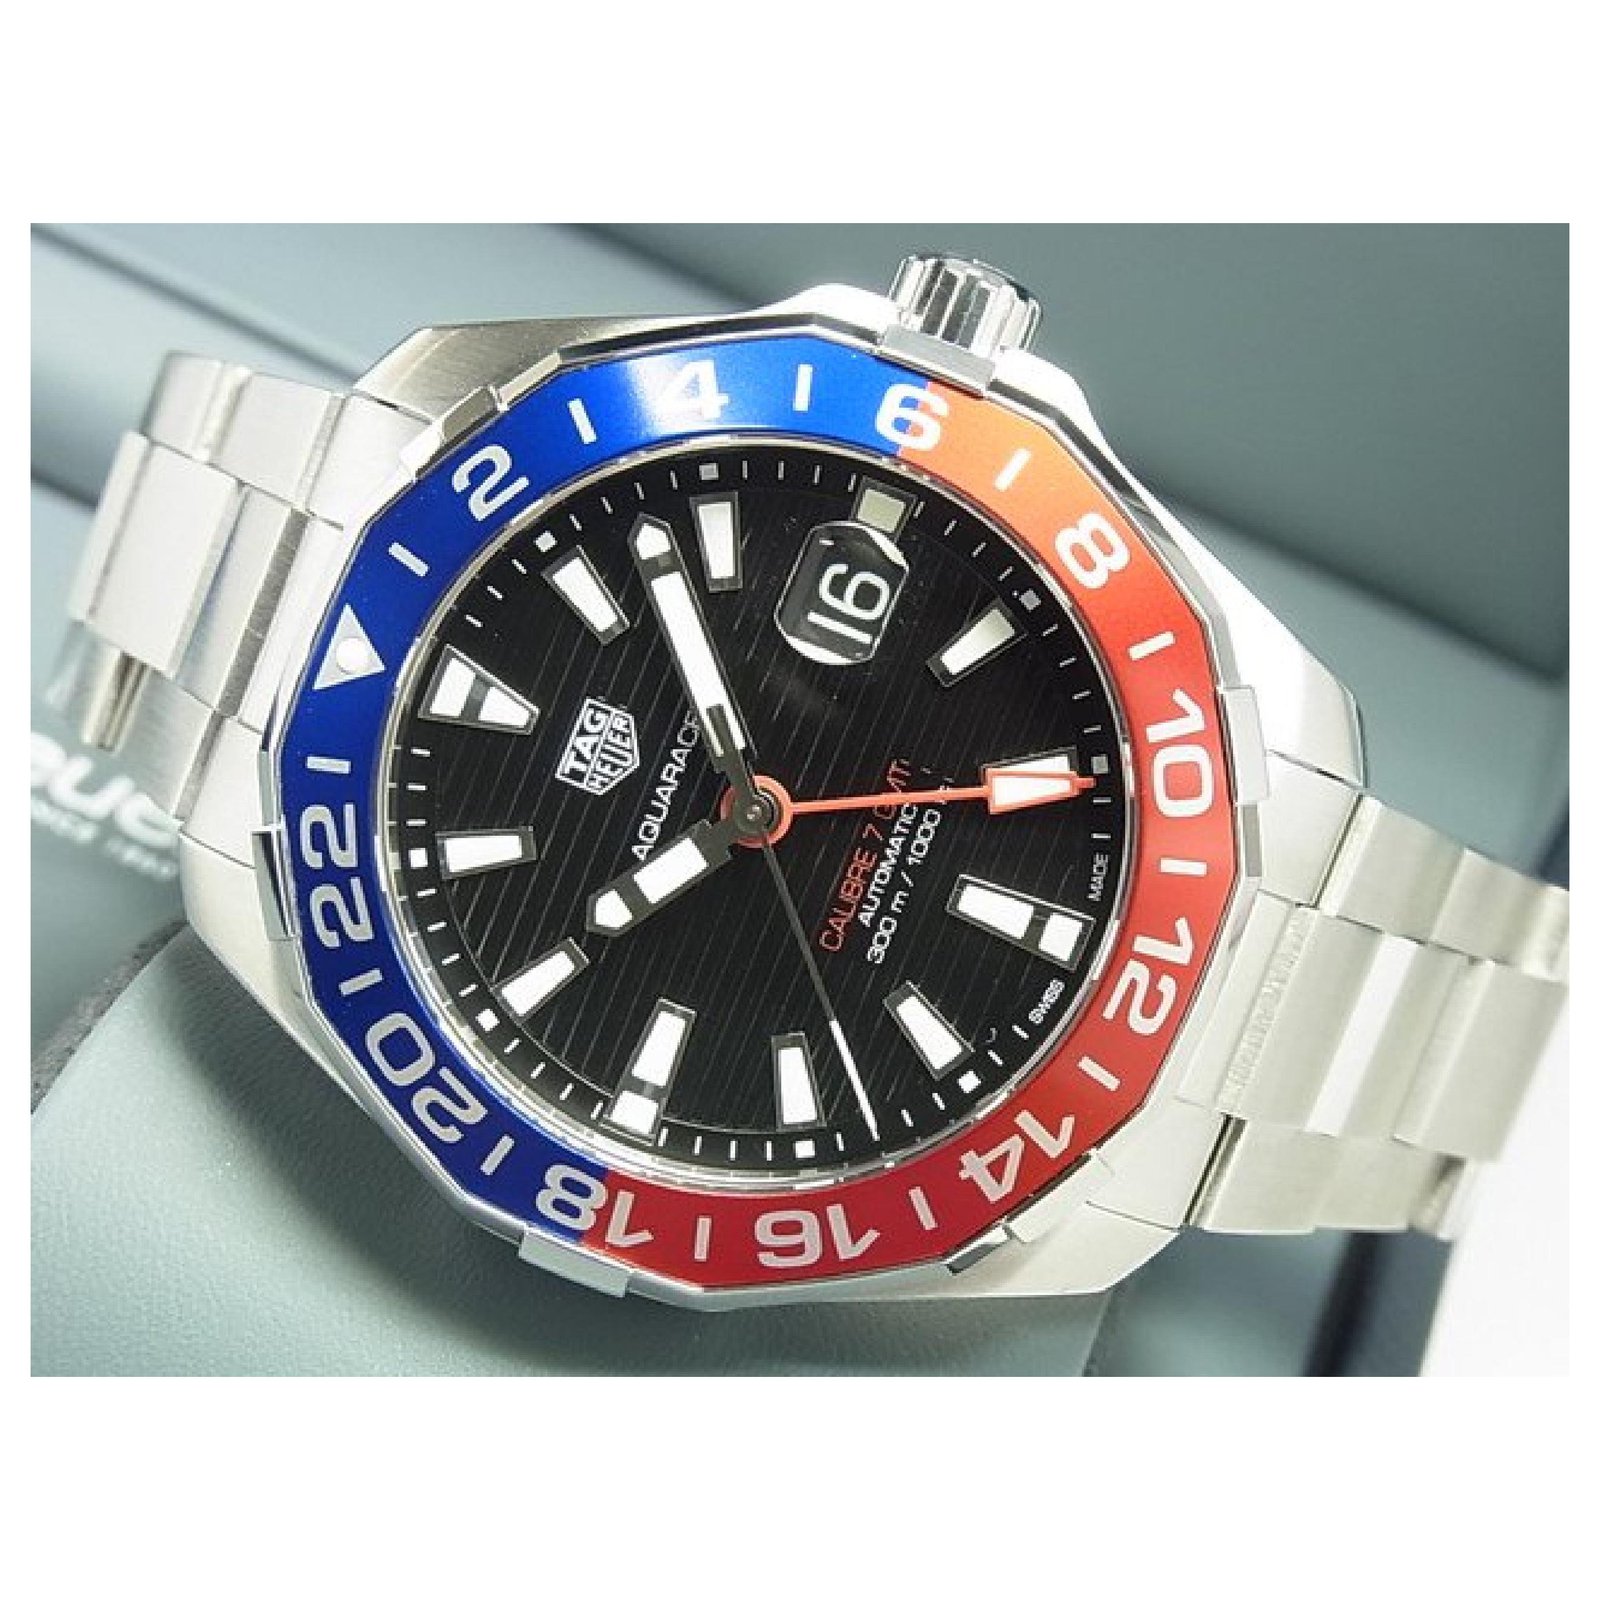 TAG Heuer Aquaracer Calibre 7 Automatic Watch with Blue and Red Case